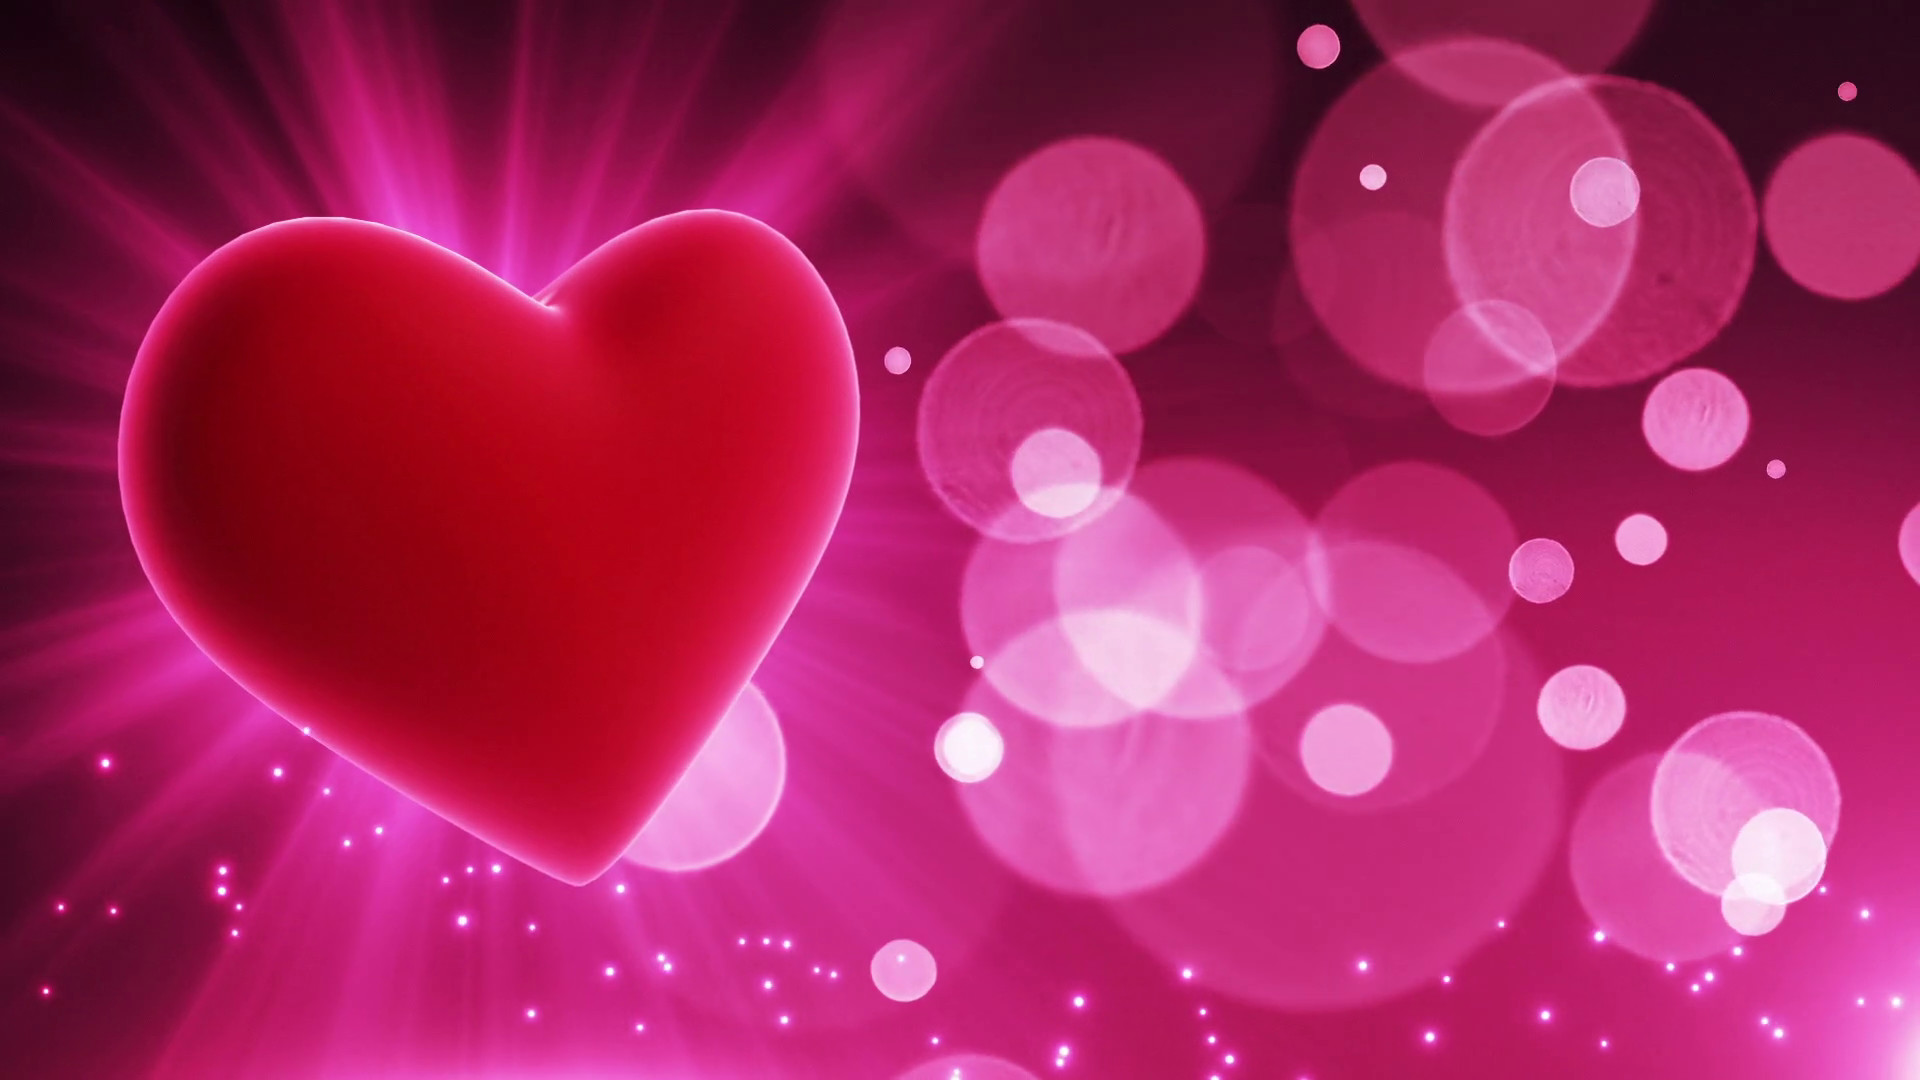 1920x1080 Beating Heart Party Themed Loopable Motion Background with Glowing  Particles and Bokeh Pink Magenta | Happy Anniversary Wishes Backdrop |  Wishing Happy ...